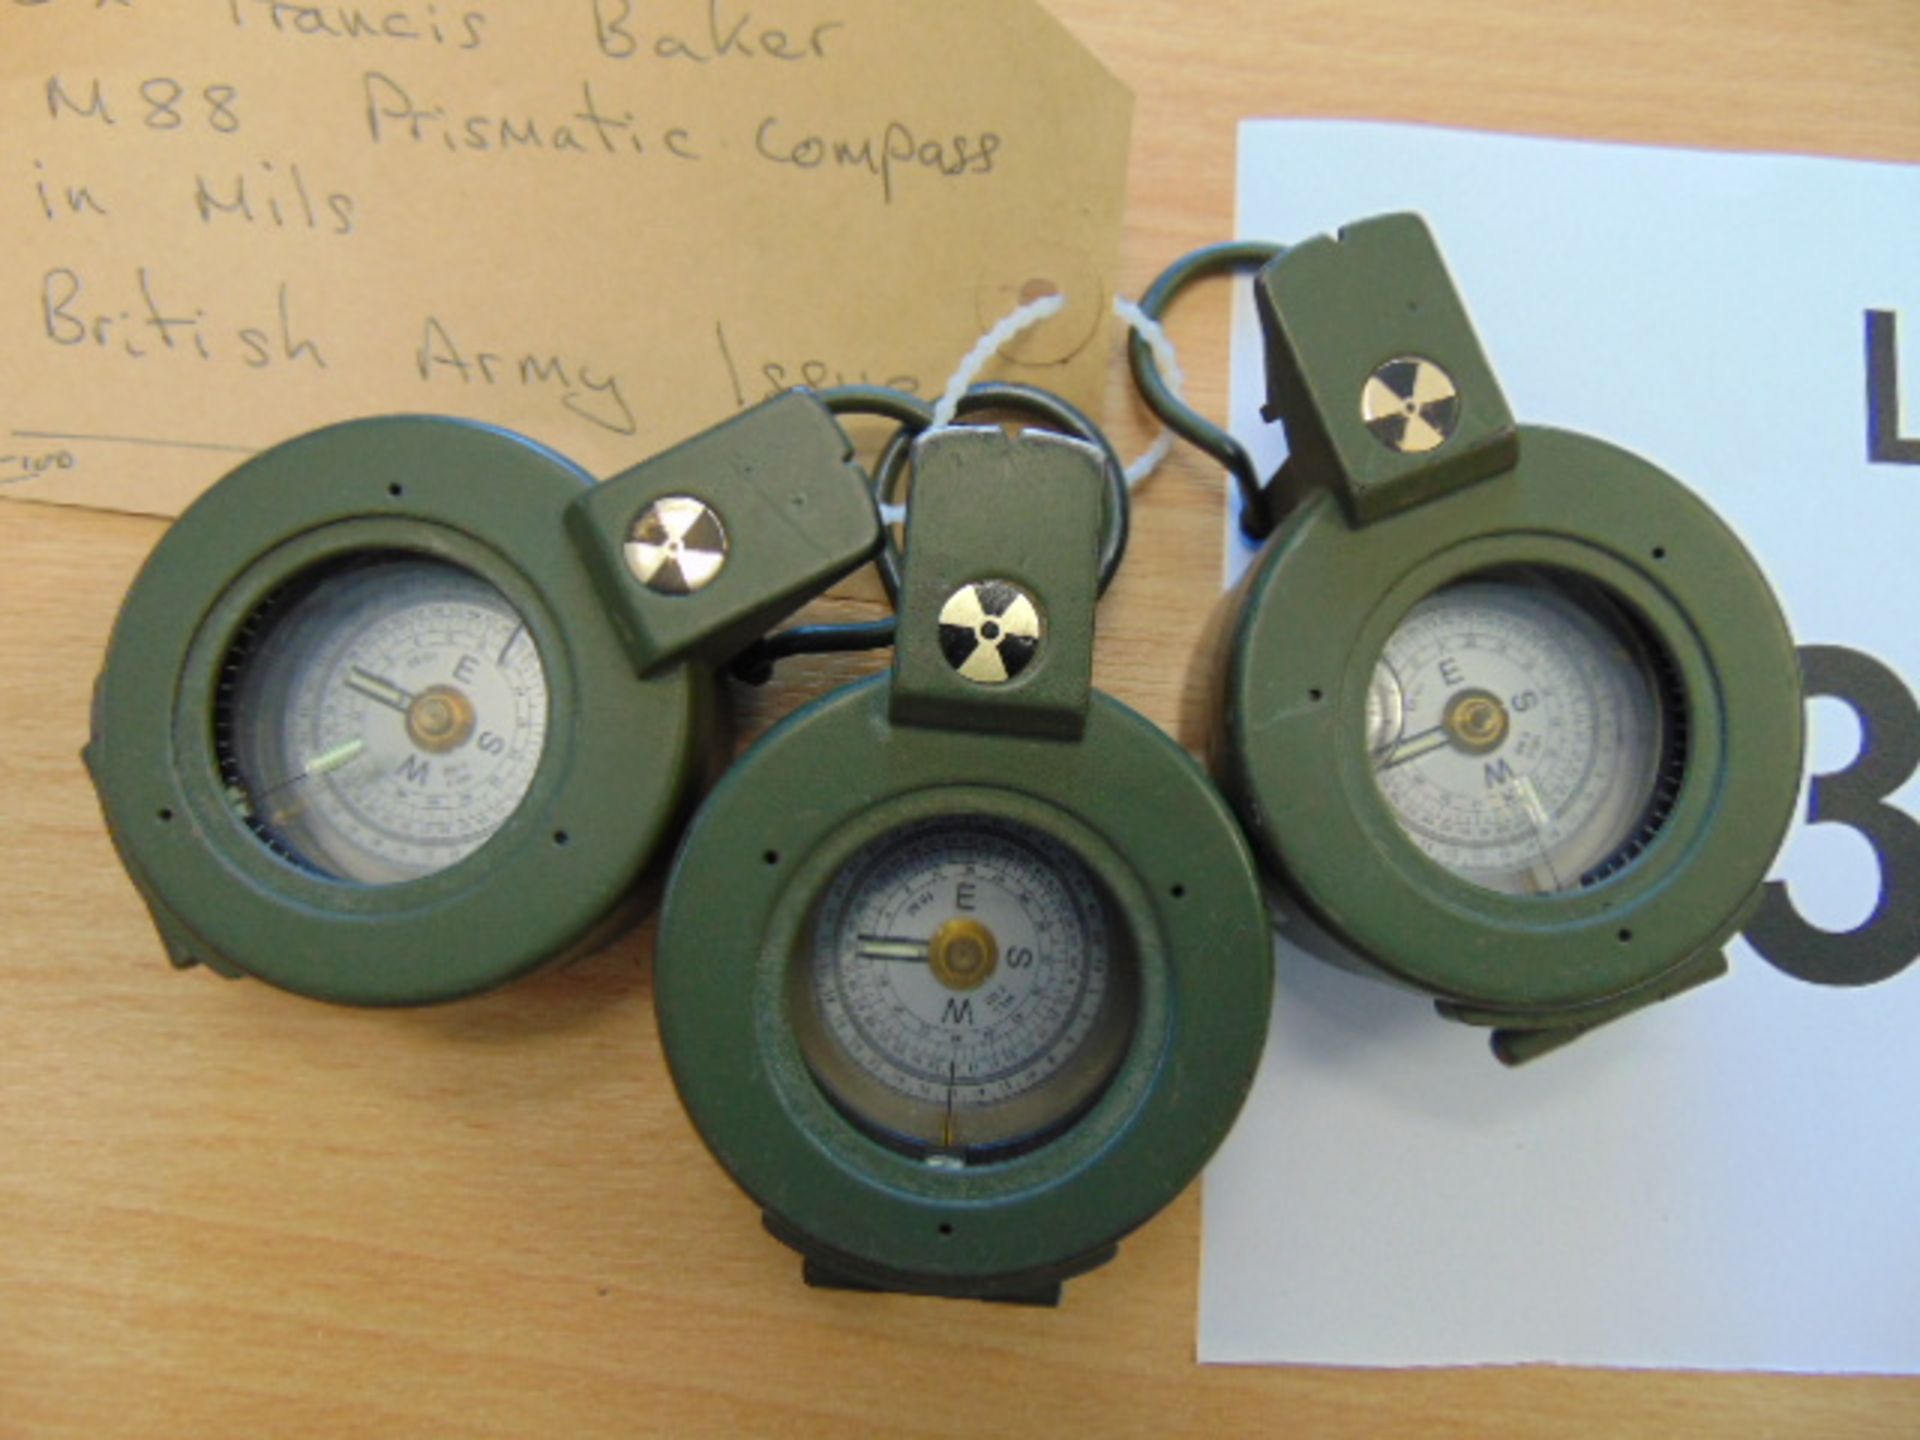 3 x Francis Baker M88 Prismatic Compass in Mils, British Army Issue - Image 2 of 3